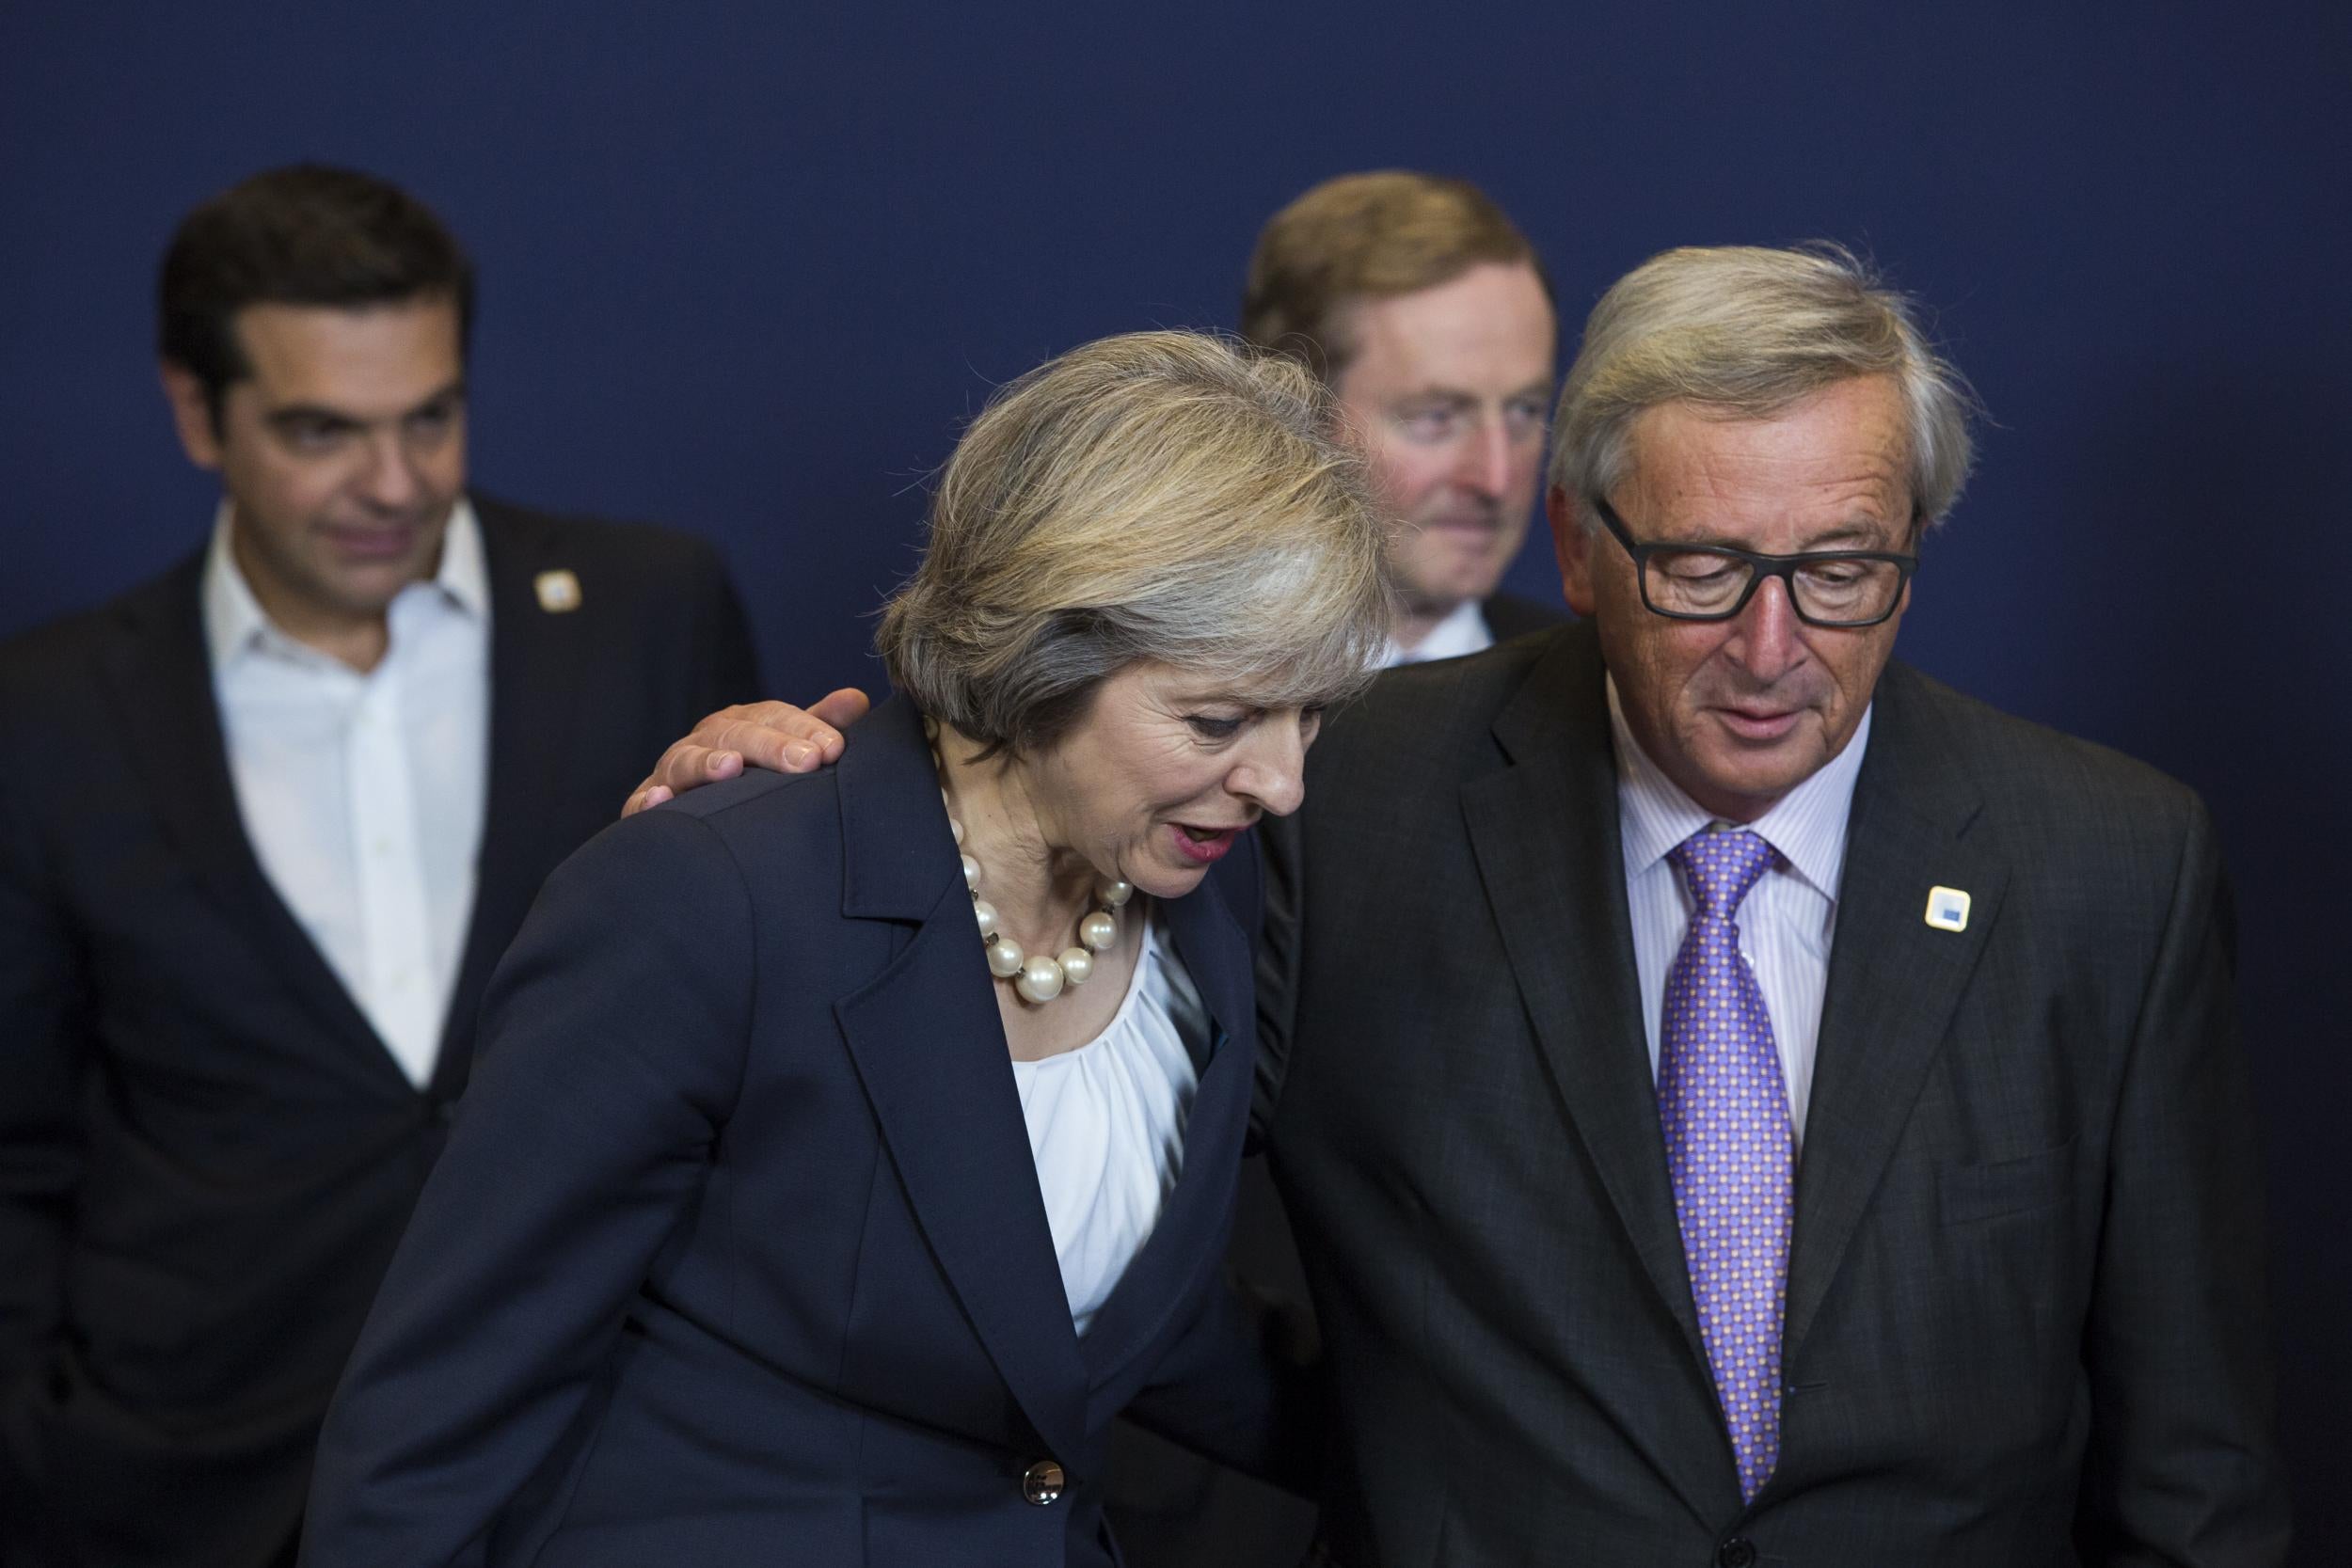 Details have been leaked about Theresa May's meeting with Jean Claude Juncker